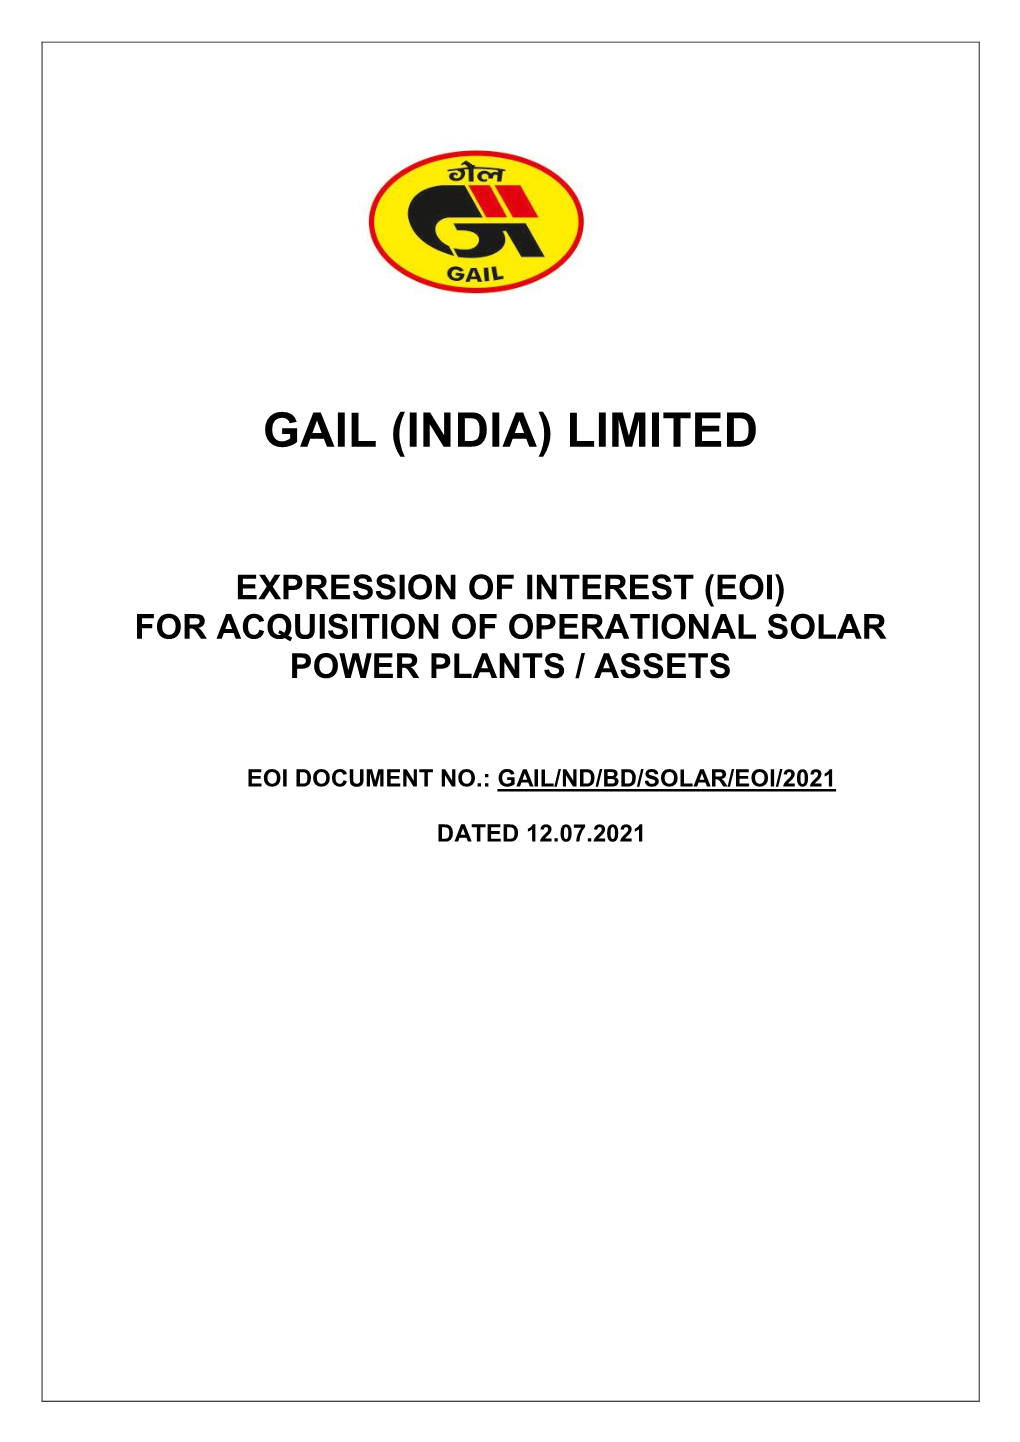 Expression of Interest (Eoi) for Acquisition of Operational Solar Power Plants / Assets